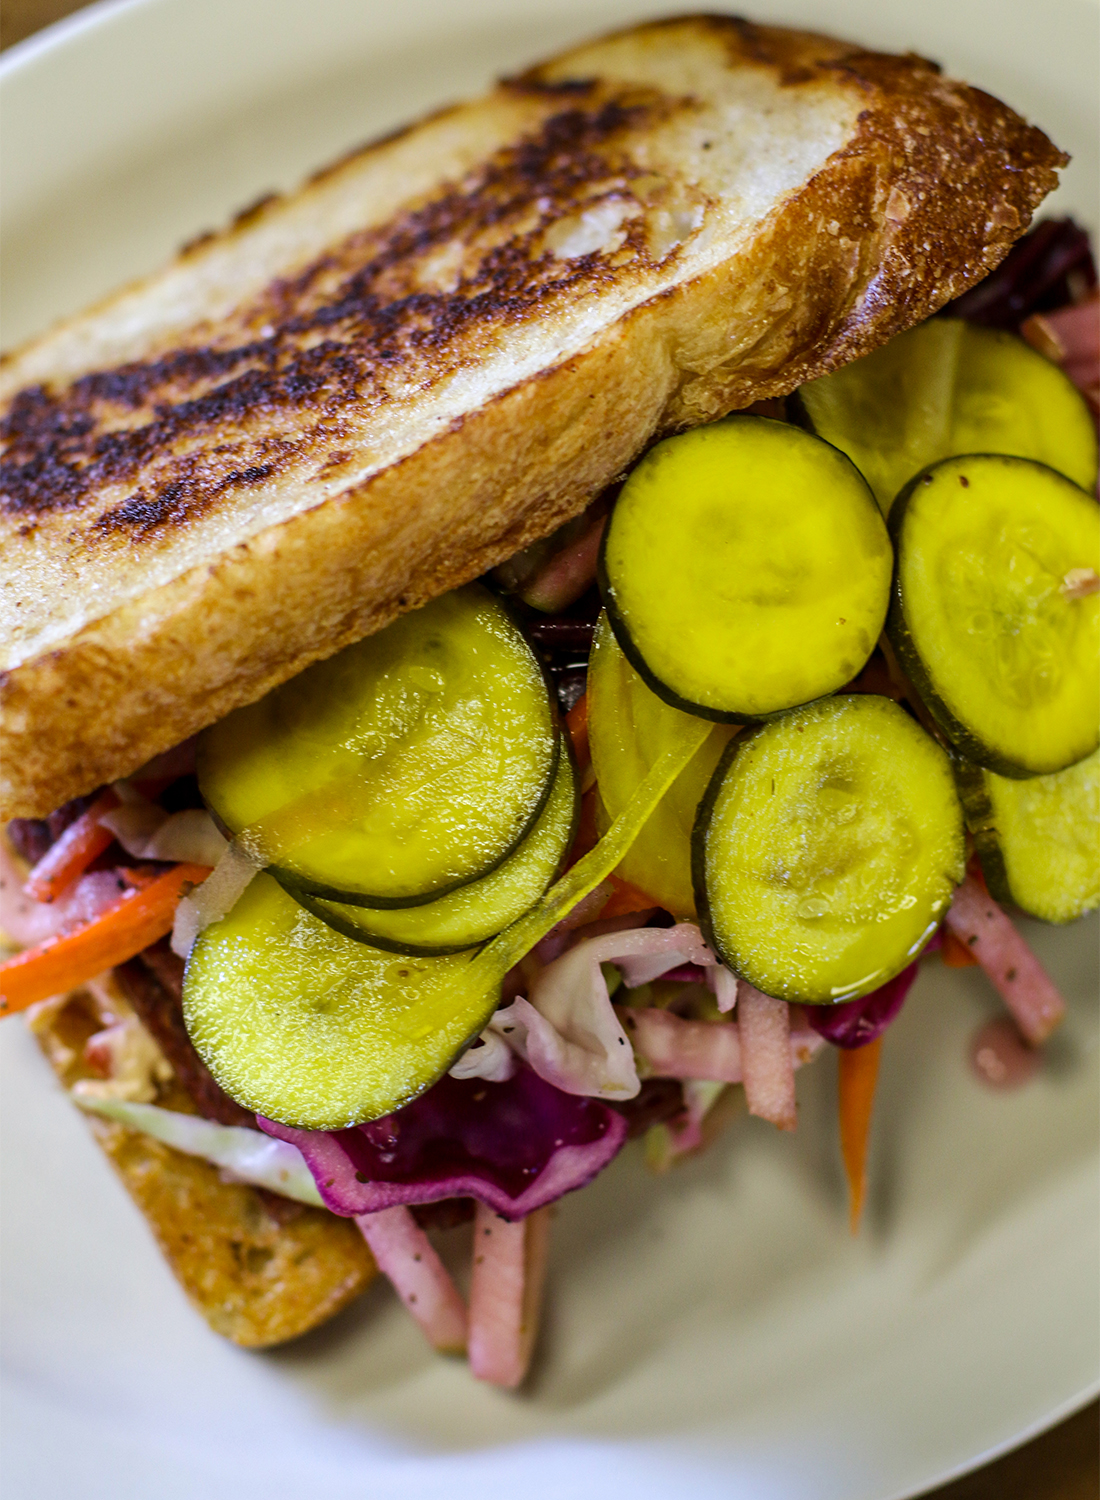 Bologna sandwich at Old Possum Taproom and Kitchen in Santa Rosa. Heather Irwin/PD